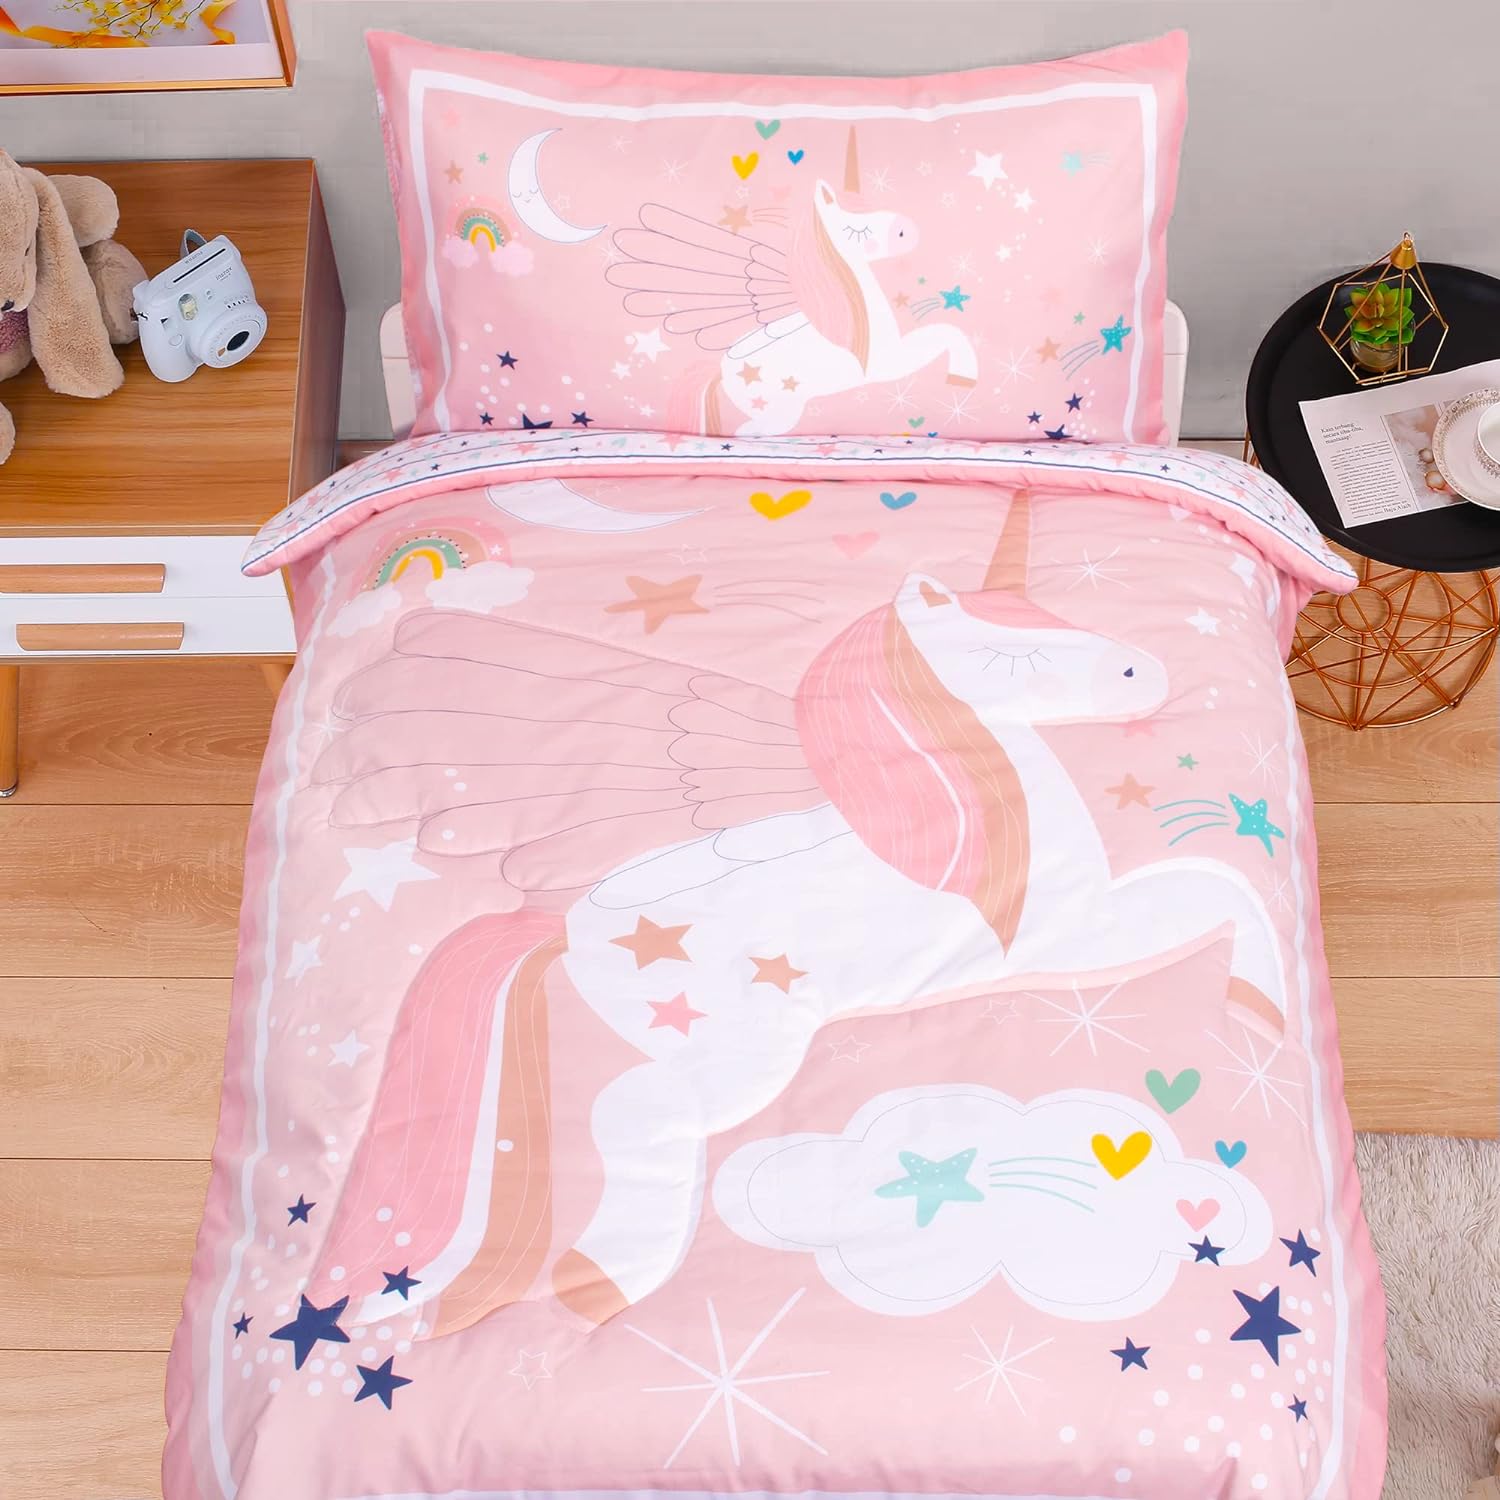 Great Choice Products Toddler Bedding Sets Unicorn Toddler Bed Sets Pink Includes Comforter Fitted Sheet And Reversible Pillowcase 3 Piece Toddler …